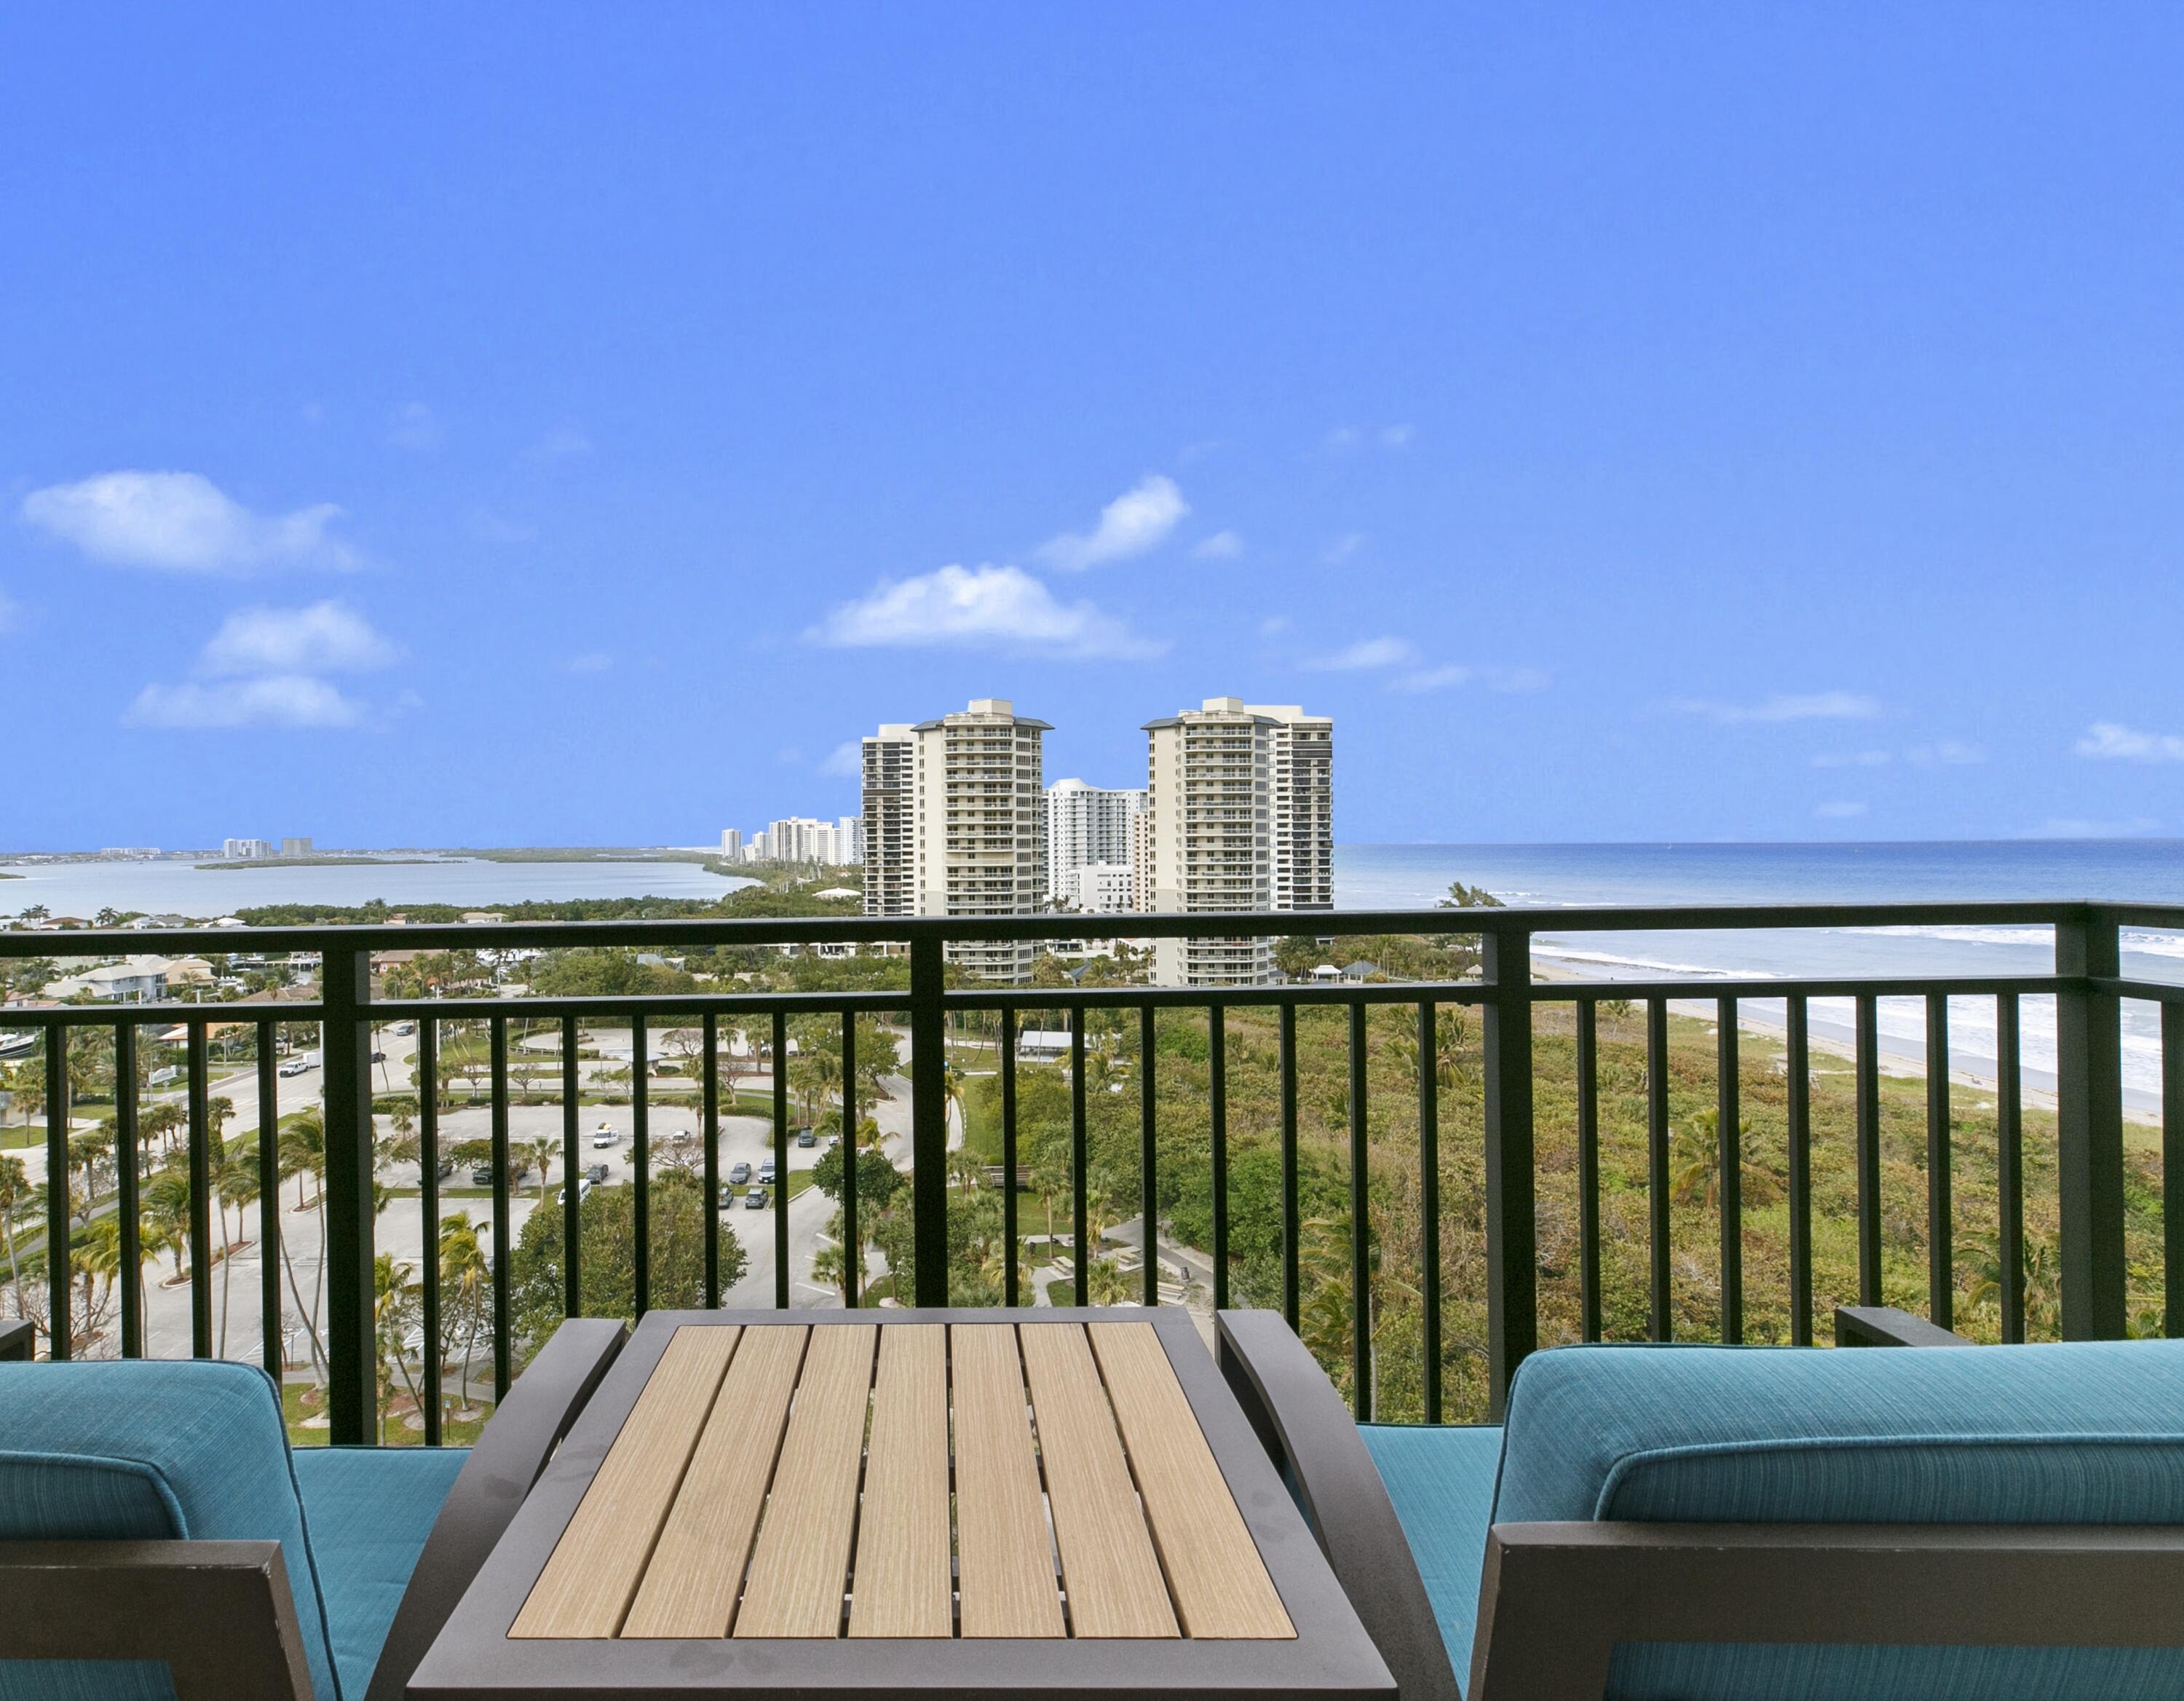 Immerse yourself in the magnificent vistas of the ocean, Intracoastal waterway, and parkland from this fully furnished 14th-floor 1-bedroom, 1-bath condo, complete with a special terrace. Indulge in luxury with high-end appliances, marble flooring, plush carpeting, and granite countertops, all complemented by exceptional amenities and awe-inspiring views. Whether you're seeking a family-friendly vacation spot, a rejuvenating escape, or a smart investment opportunity on Singer Island, this property offers it all. Maximize income potential by participating in the hotel's rental program, renting out independently, or simply moving in to enjoy the luxurious lifestyle firsthand. With 239 spacious suites and 66 residential condominiums, the Resort boasts 4,000 sq. ft. of meeting space......... An 8,500-square-foot spa, along with a diverse range of amenities, awaits to enhance your experience. Elevate your stay with personalized room service, attentive valet attendants, and a dedicated full-time concierge available to arrange private events, secure theater tickets, make dinner reservations, and organize travel arrangements. Pool and beachside attendants stand ready to provide plush beach towels, comfortable lounge chairs, and refreshing frozen beverages. Private outdoor cabanas offer an idyllic setting for relaxed poolside dining. Dining options abound, from the charming ocean-side eatery to the convenience of in-room dining or special events held in the impressive entertainment veranda.

The Resort at Singer Island, adorned with sophisticated dark wood tones, stainless steel kitchen appliances, and marble baths, boasts a contemporary ambiance. Recent renovations, notably at the 3800 Ocean restaurant, enhance the allure of the property. Each suite features expansive terraces, offering majestic views of the Atlantic Ocean or Intracoastal Waterways. A temperature-controlled wine room is available for storing your private wine collection.

Savor relaxation on the pristine white sands of Singer Island, where attentive pool and beachside staff cater to your every need with plush beach towels, inviting lounge chairs, and delightful frozen beverages. Enjoy leisurely poolside lunches in the outdoor private cabanas, completing the epitome of luxury living.

Situated in Florida's tropical island resort community, Singer Island is renowned for its picturesque white sandy beaches, waterfront residences, shopping districts, restaurants, and charming resort atmosphere. Nestled along the Atlantic Ocean, Singer Island offers breathtaking views and a diverse marine and wildlife environment. Featuring three single-family home communities, nearly 50 condominium complexes, and the scenic MacArthur State Park, all within Palm Beach County, Singer Island is a hidden gem off the coast of Palm Beach. Established by Paris Singer, the son of sewing machine magnate Isaac Singer, the island now features upscale hotels, an outdoor shopping center, and immaculate beaches. Spanning 1,500 acres, Singer Island stretches approximately 5 miles in length and 1/2 mile in width. Located just 15 minutes from Palm Beach International Airport and 70 miles north of Miami, Singer Island is also in close proximity to year-round golf courses and renowned shopping destinations. Renowned for activities such as blue water sport fishing, sailing, windsurfing, jet skiing, and unforgettable boating excursions, Singer Island truly embodies the essence of a tropical paradise.